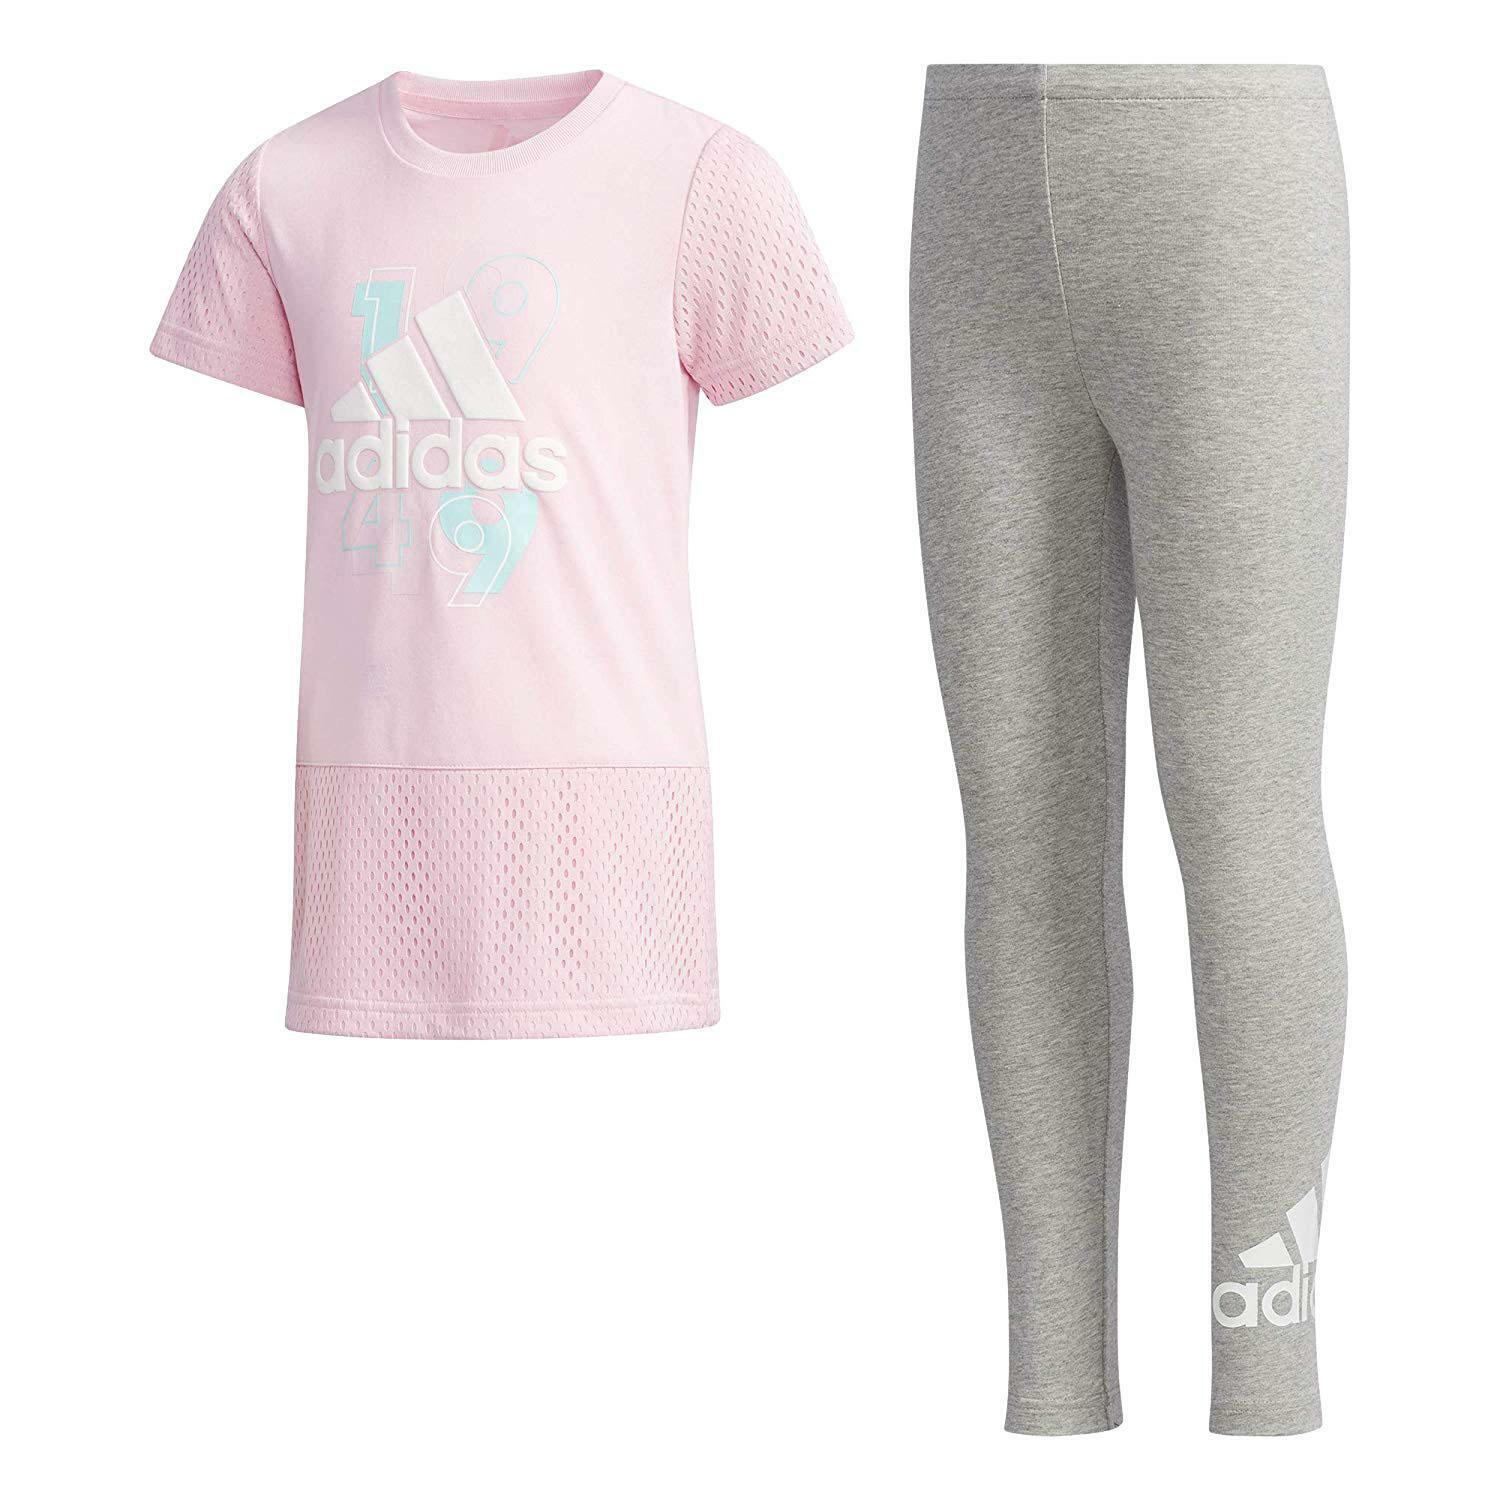 ADIDAS LG TEE TIGHT SE COMPLET FILLE ROSE DW4026 | eBay